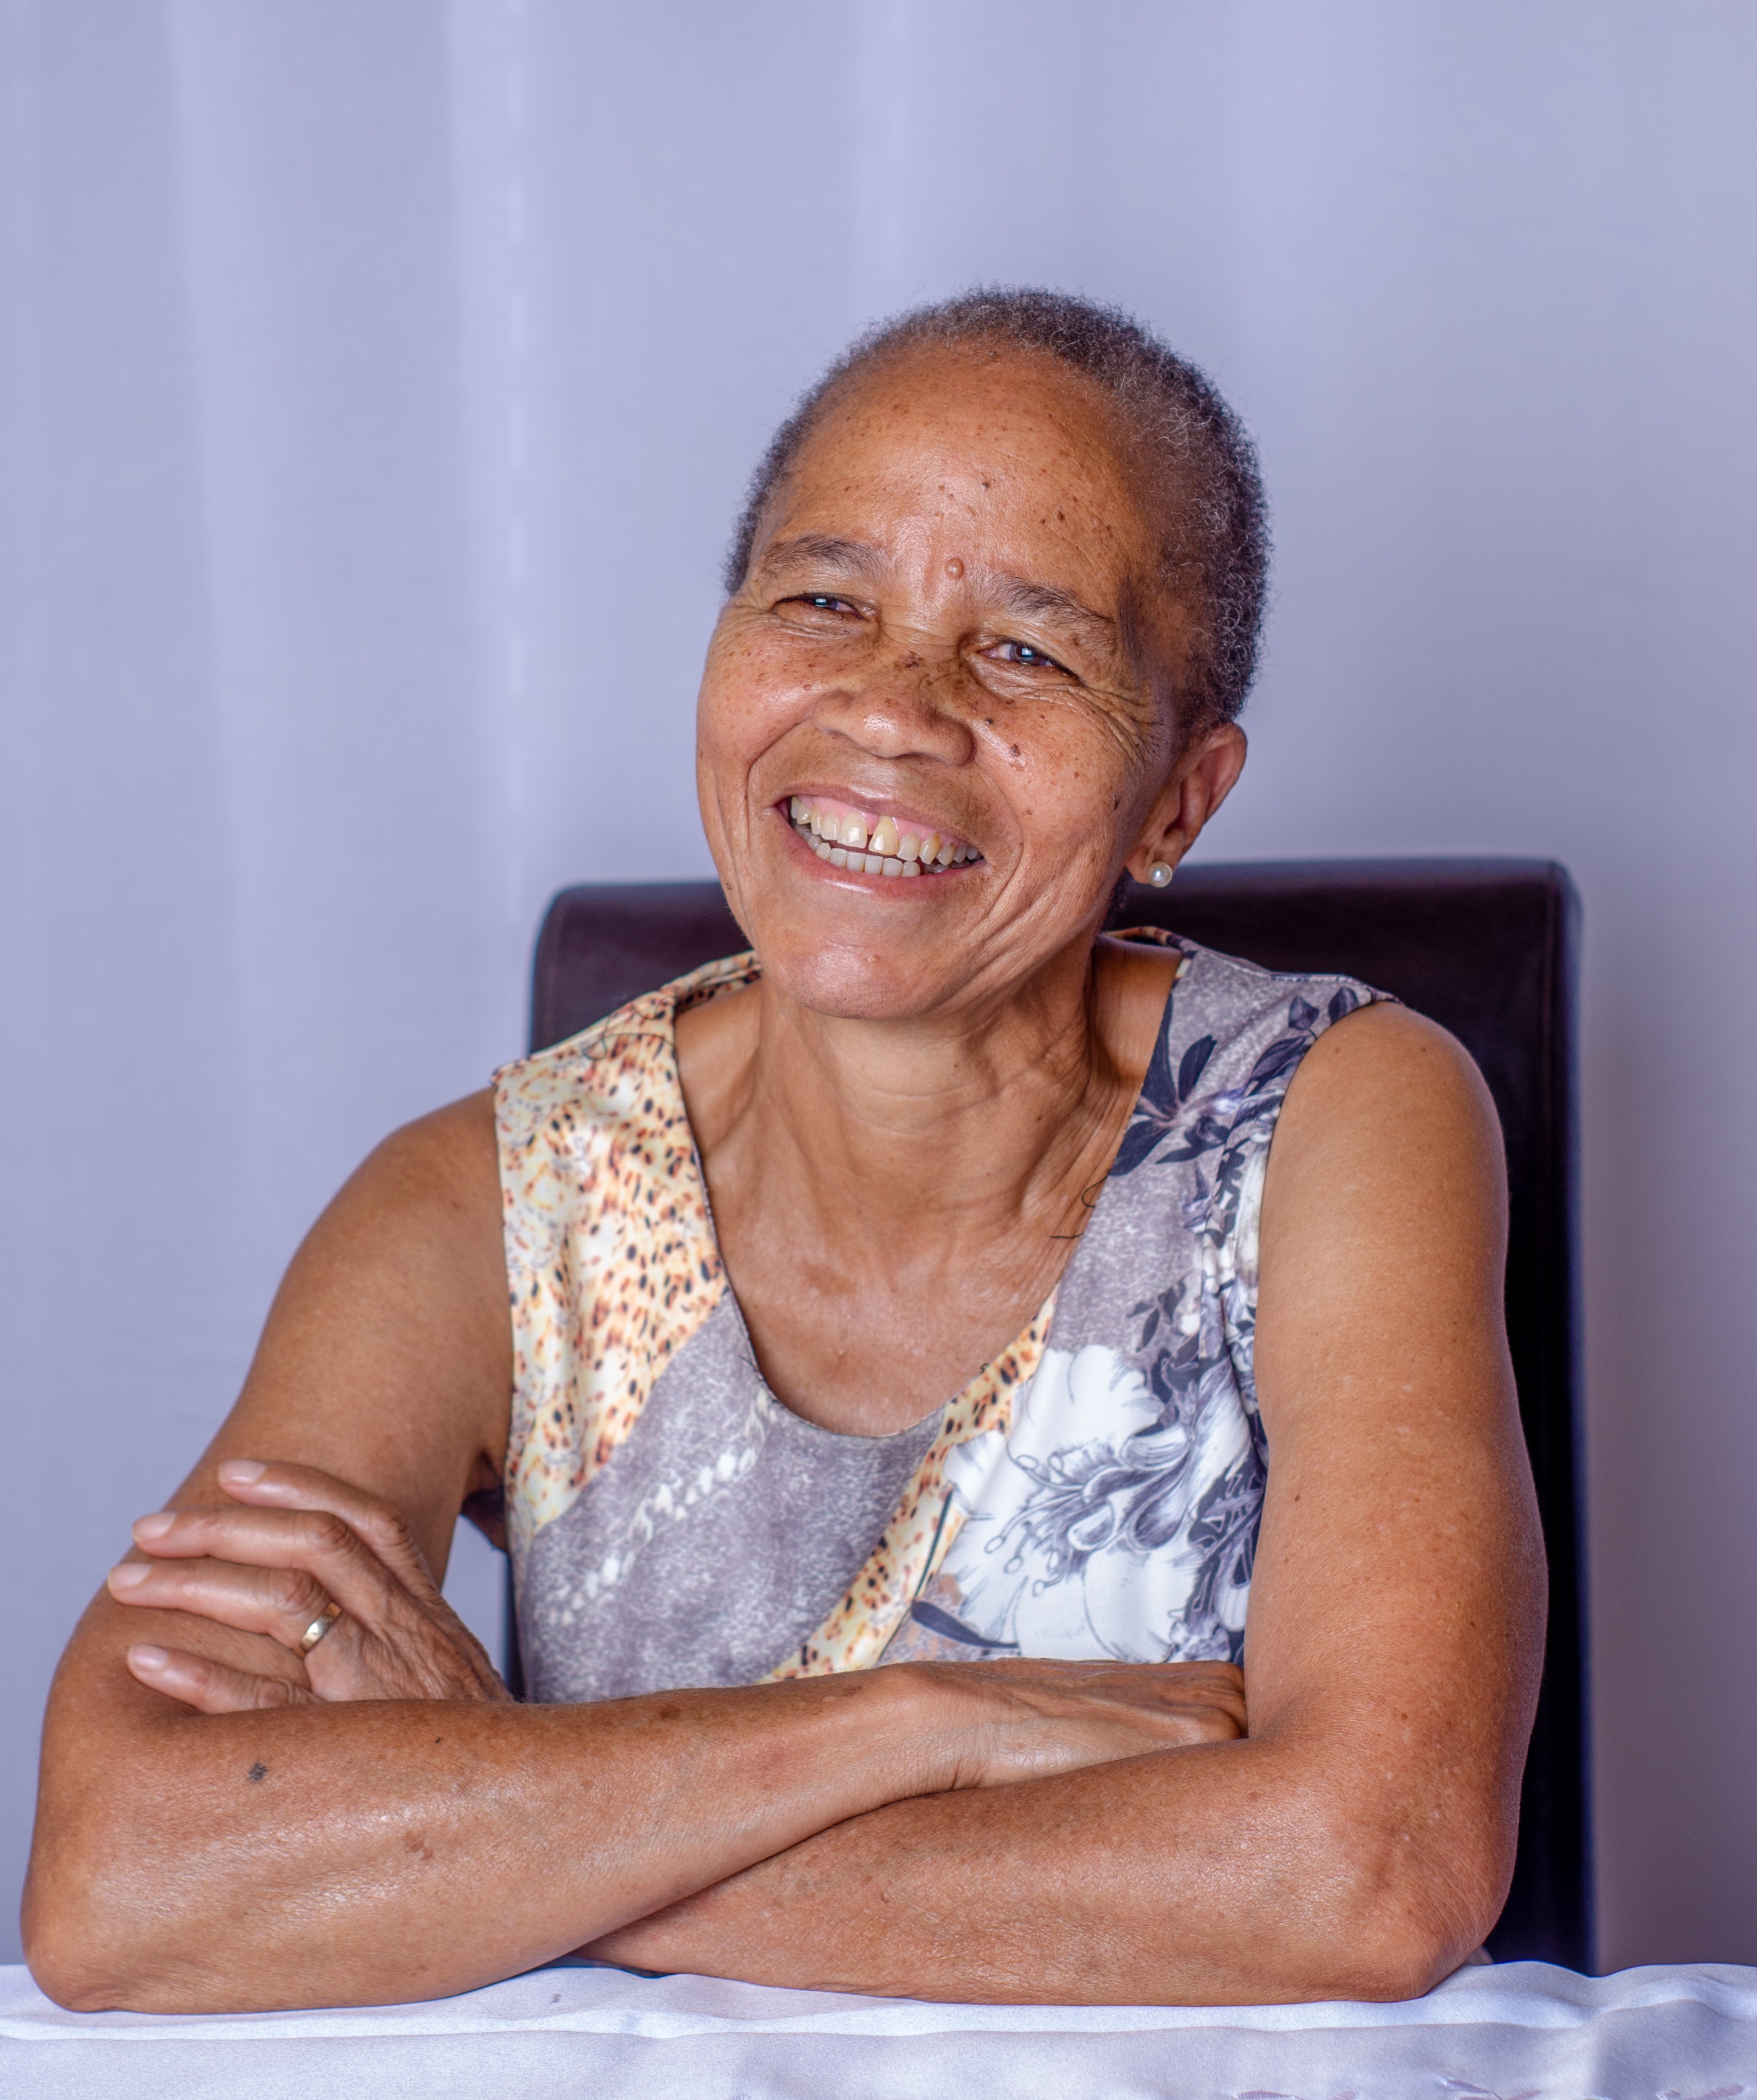 Elderly woman sitting on chair and smiling